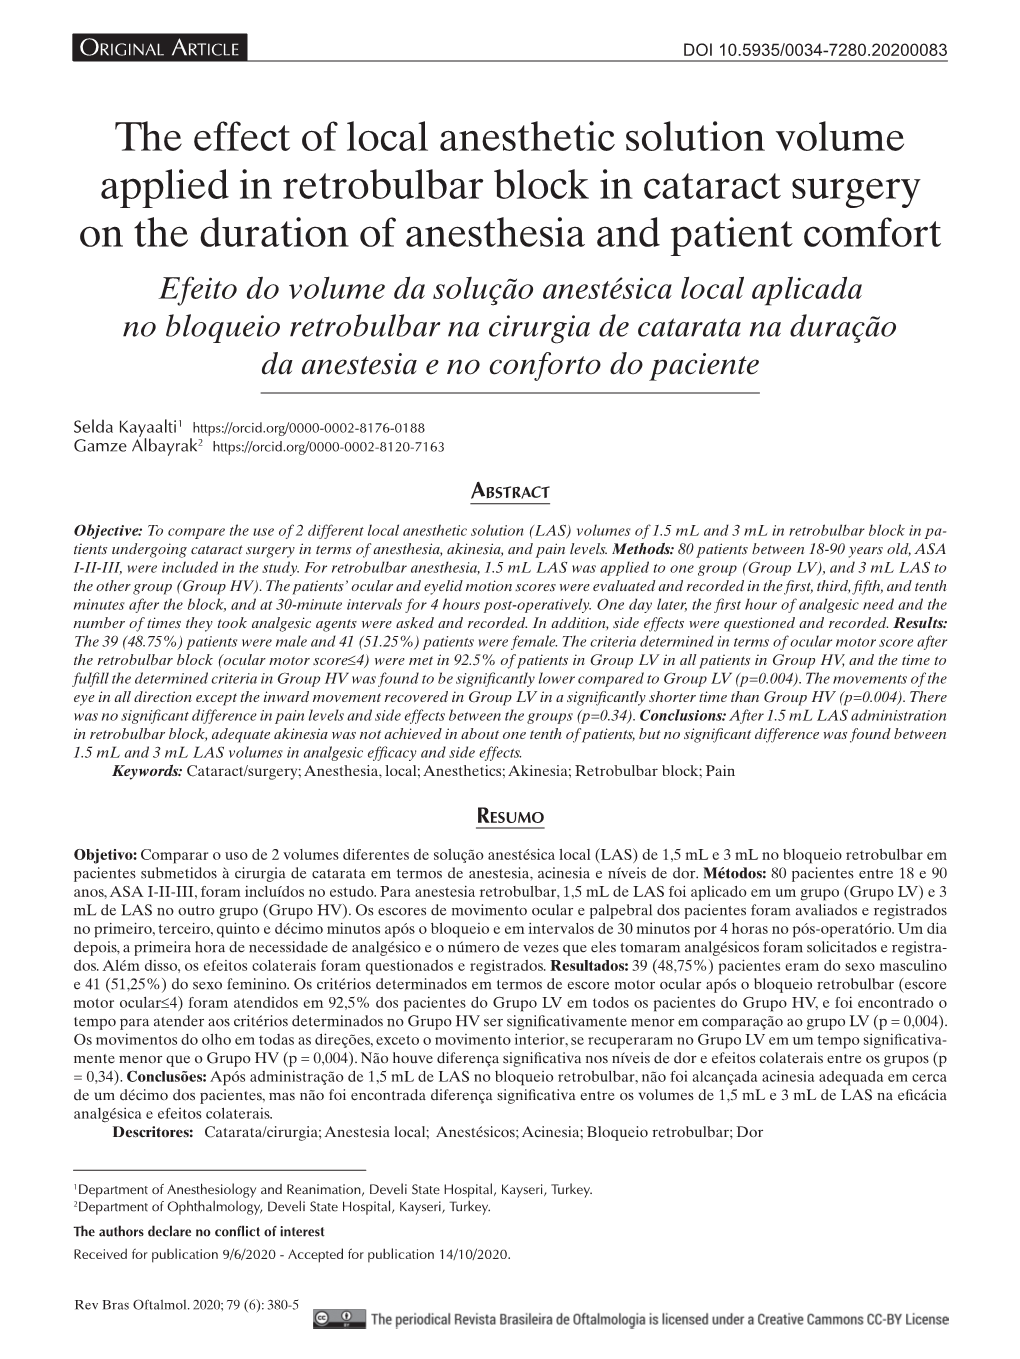 The Effect of Local Anesthetic Solution Volume Applied in Retrobulbar Block